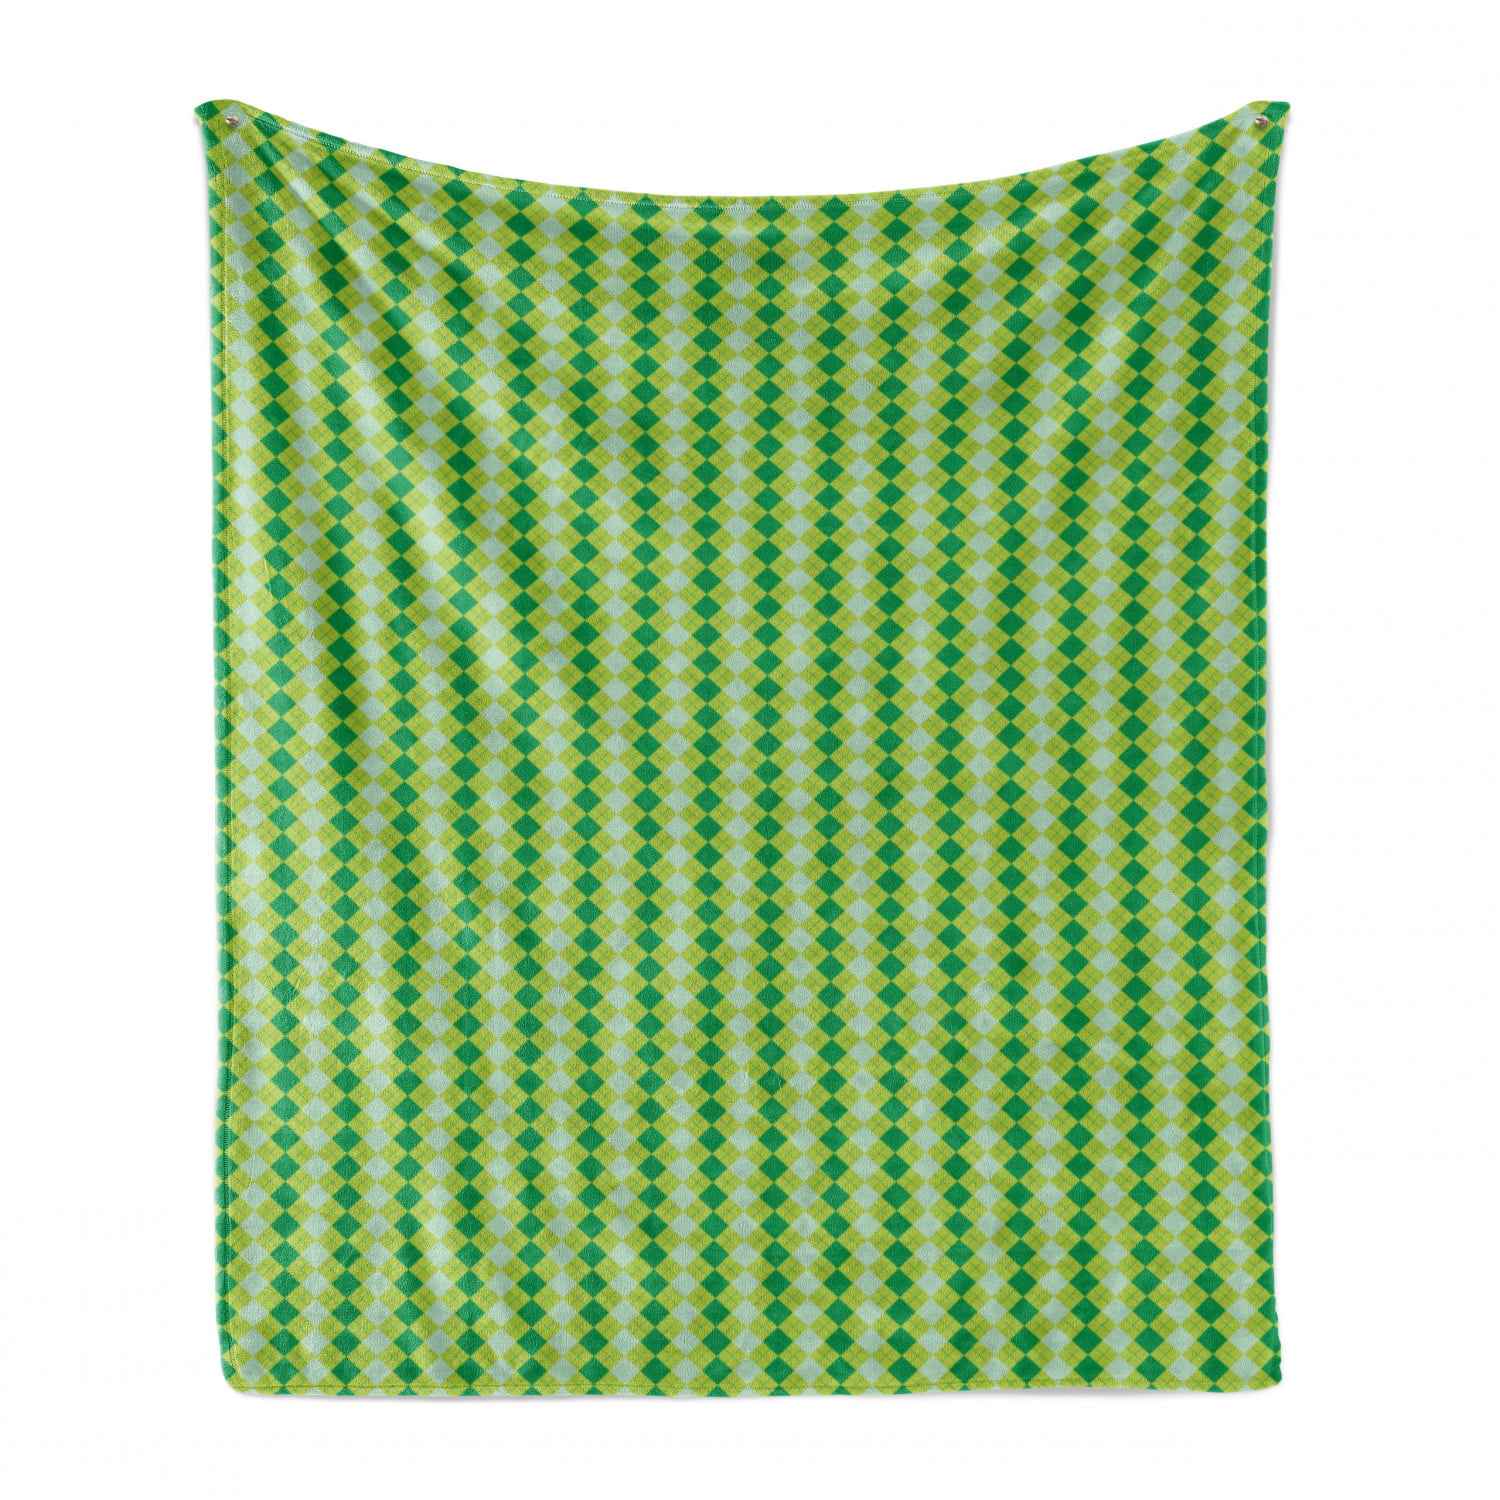 Cozy Plush for Indoor and Outdoor Use Monochrome Geometric Pattern with Diagonal Square Check Ambesonne Abstract Green Soft Flannel Fleece Throw Blanket Green Almond Green 50 x 60 